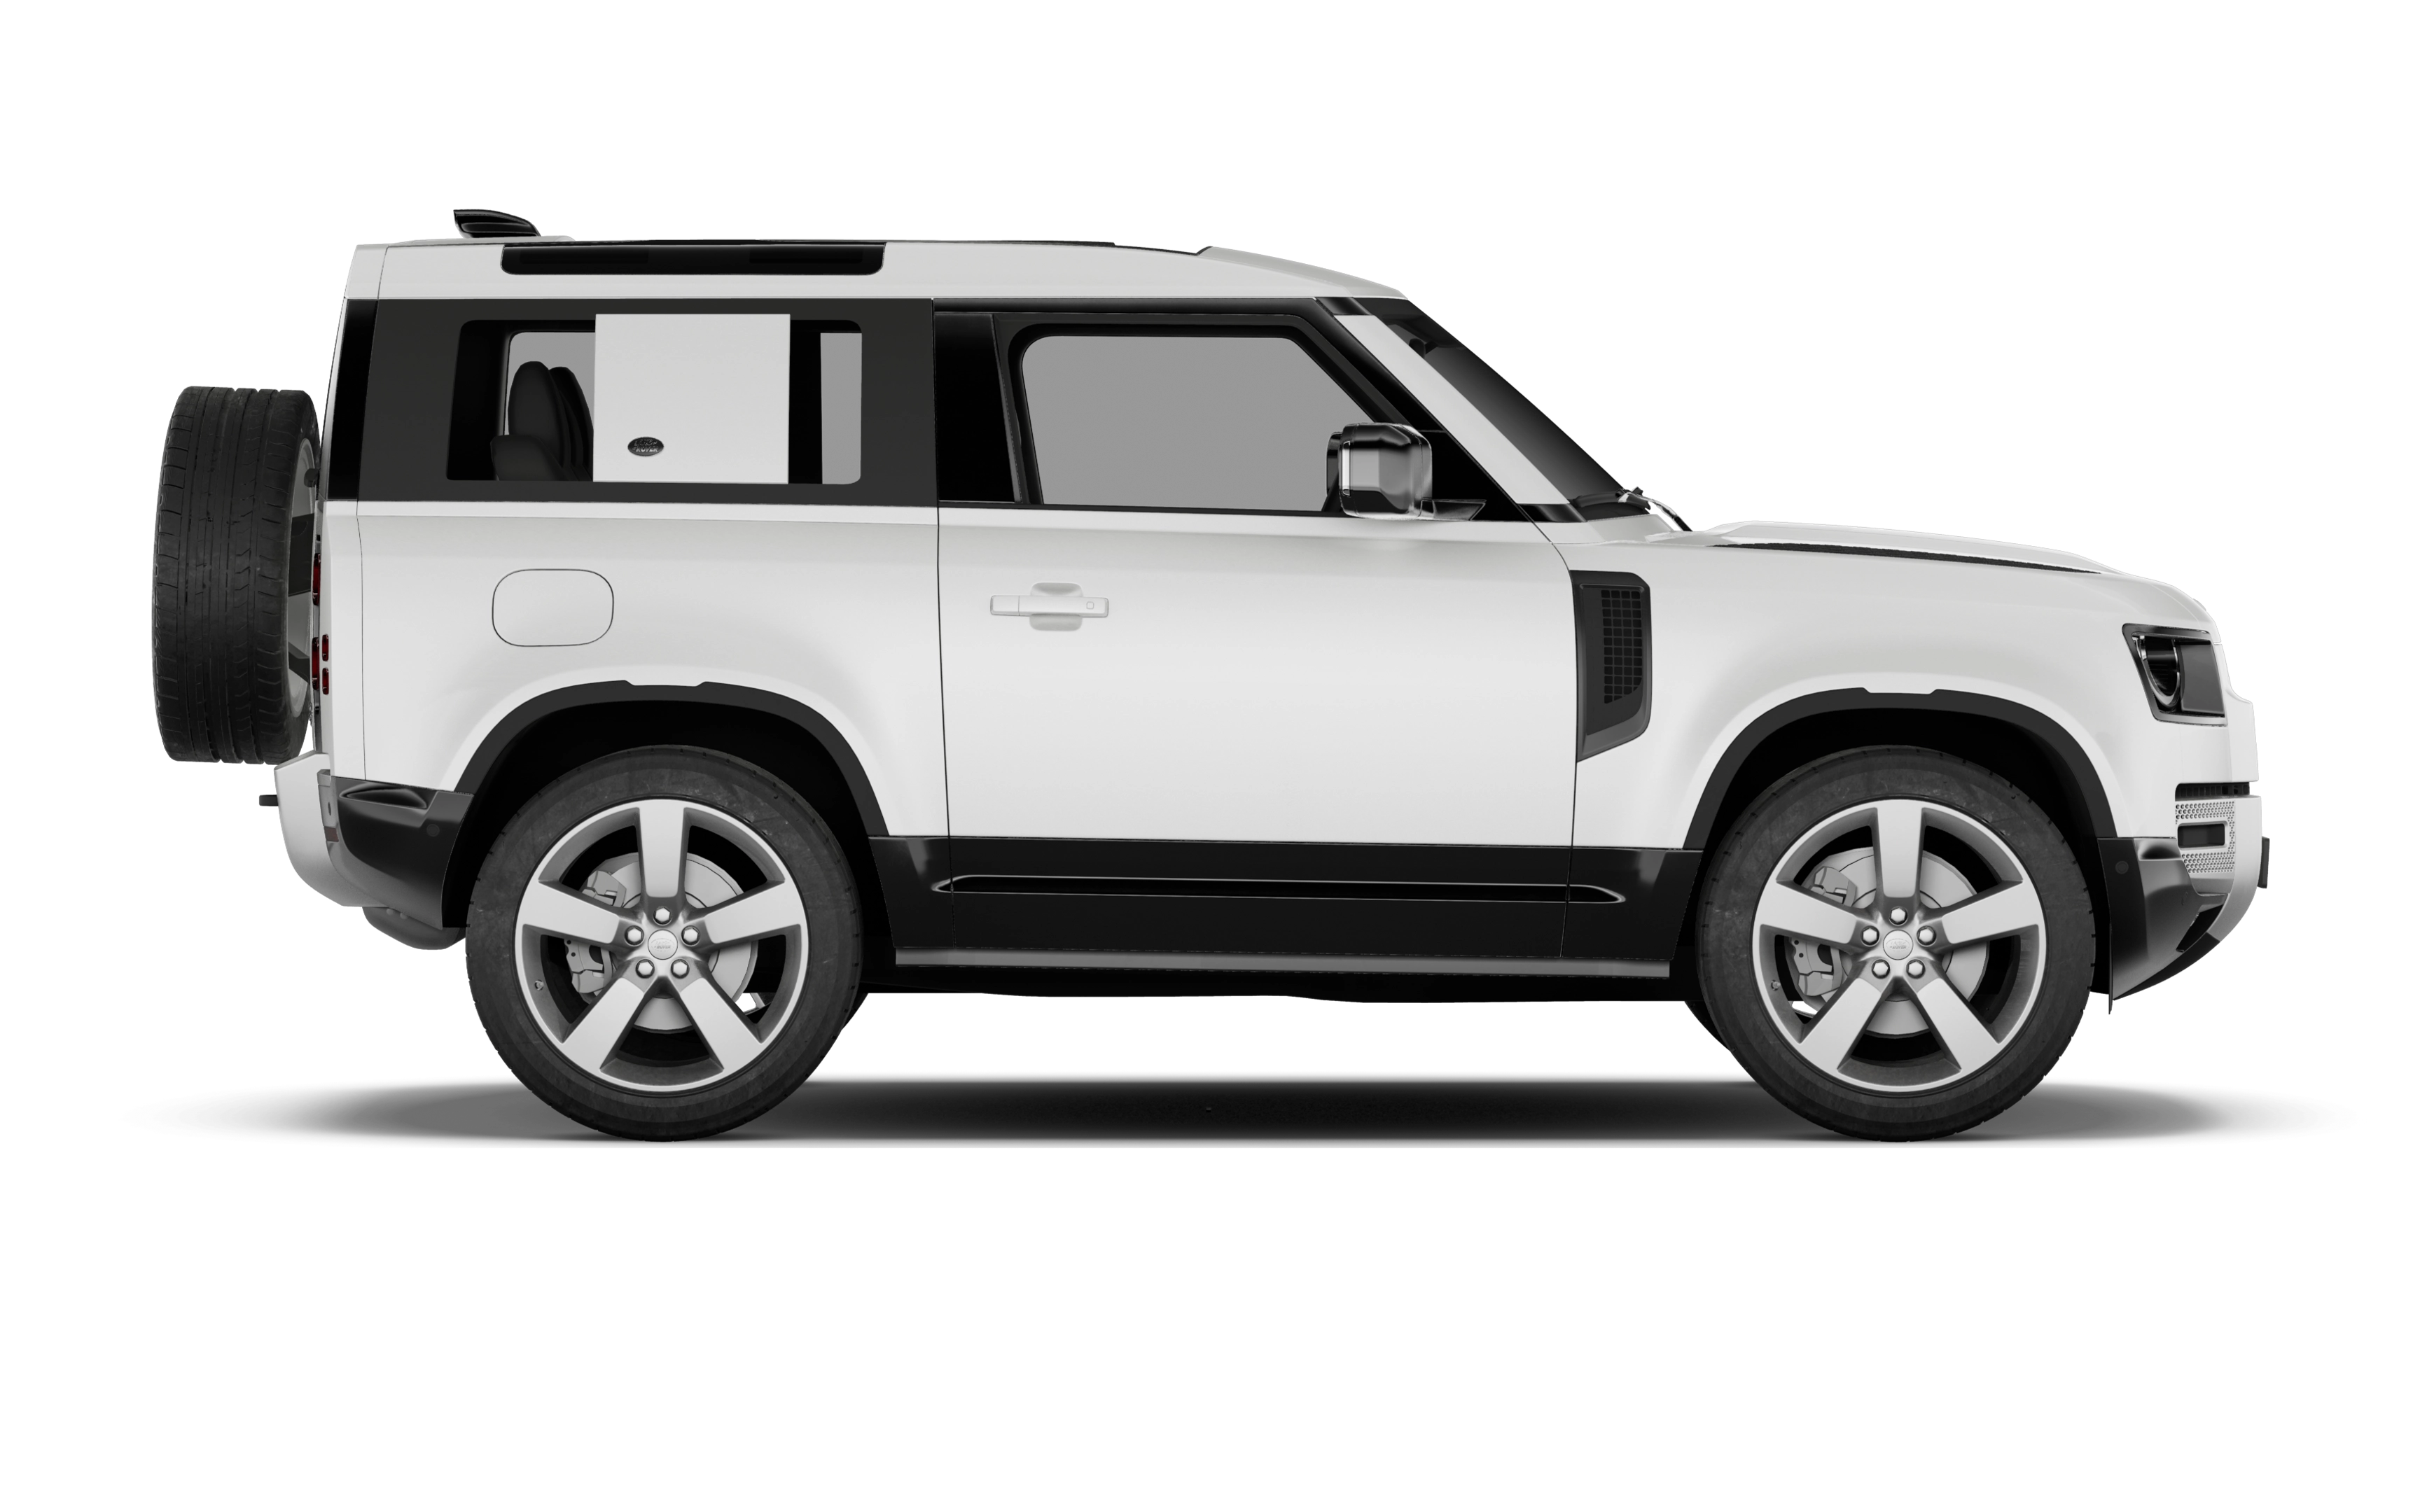 Land rover defender 90 3.0 d250 hard top hse auto [3 seat]